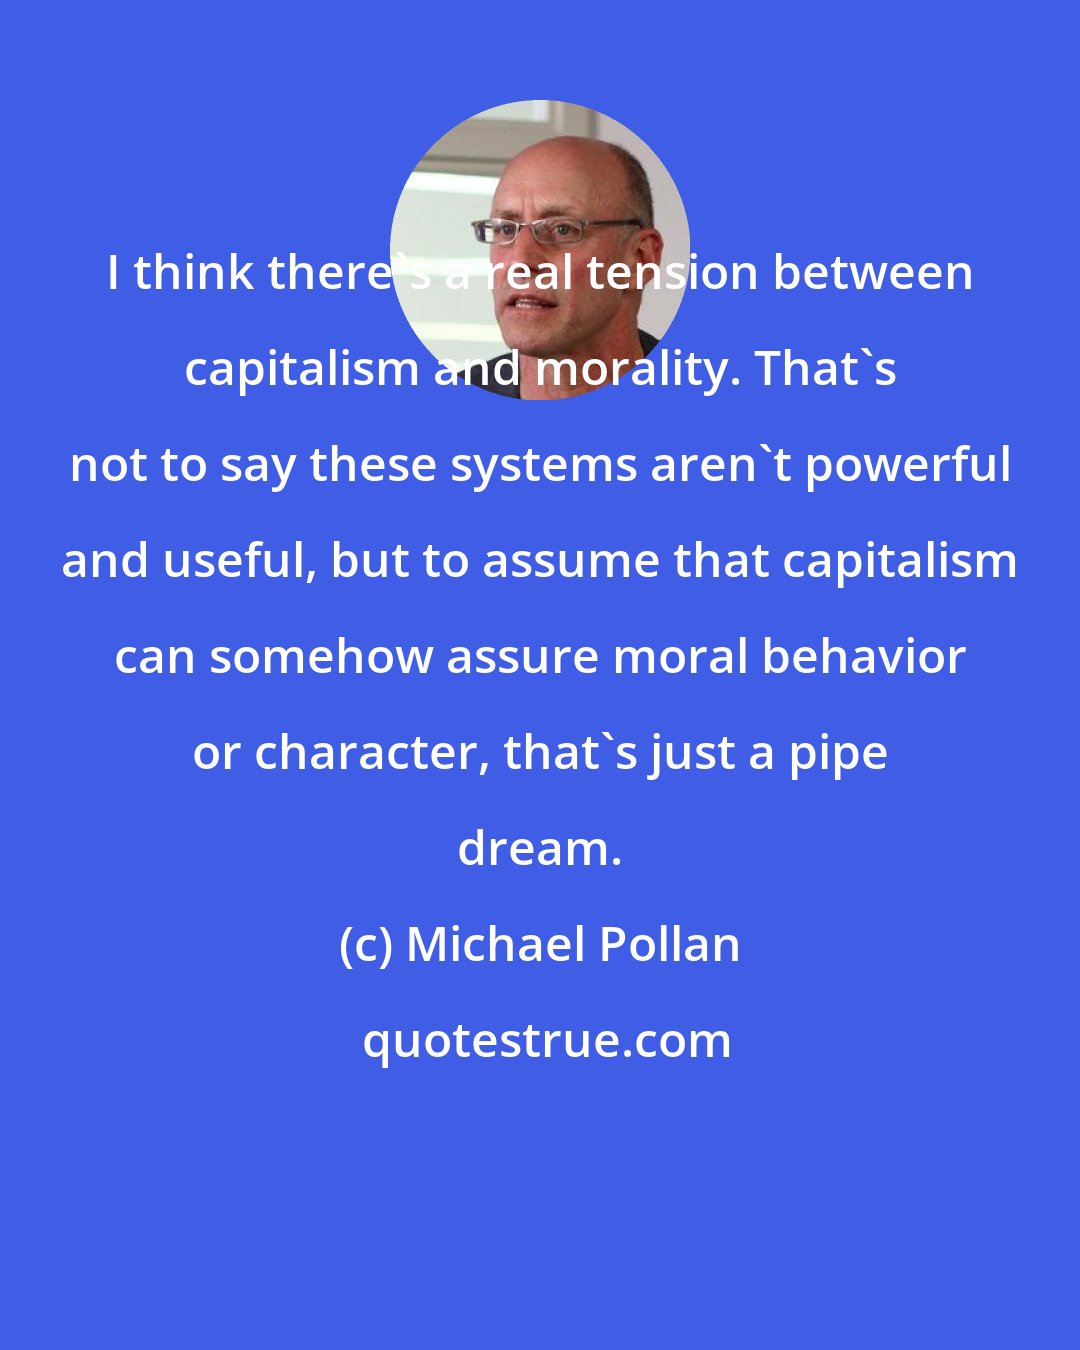 Michael Pollan: I think there's a real tension between capitalism and morality. That's not to say these systems aren't powerful and useful, but to assume that capitalism can somehow assure moral behavior or character, that's just a pipe dream.